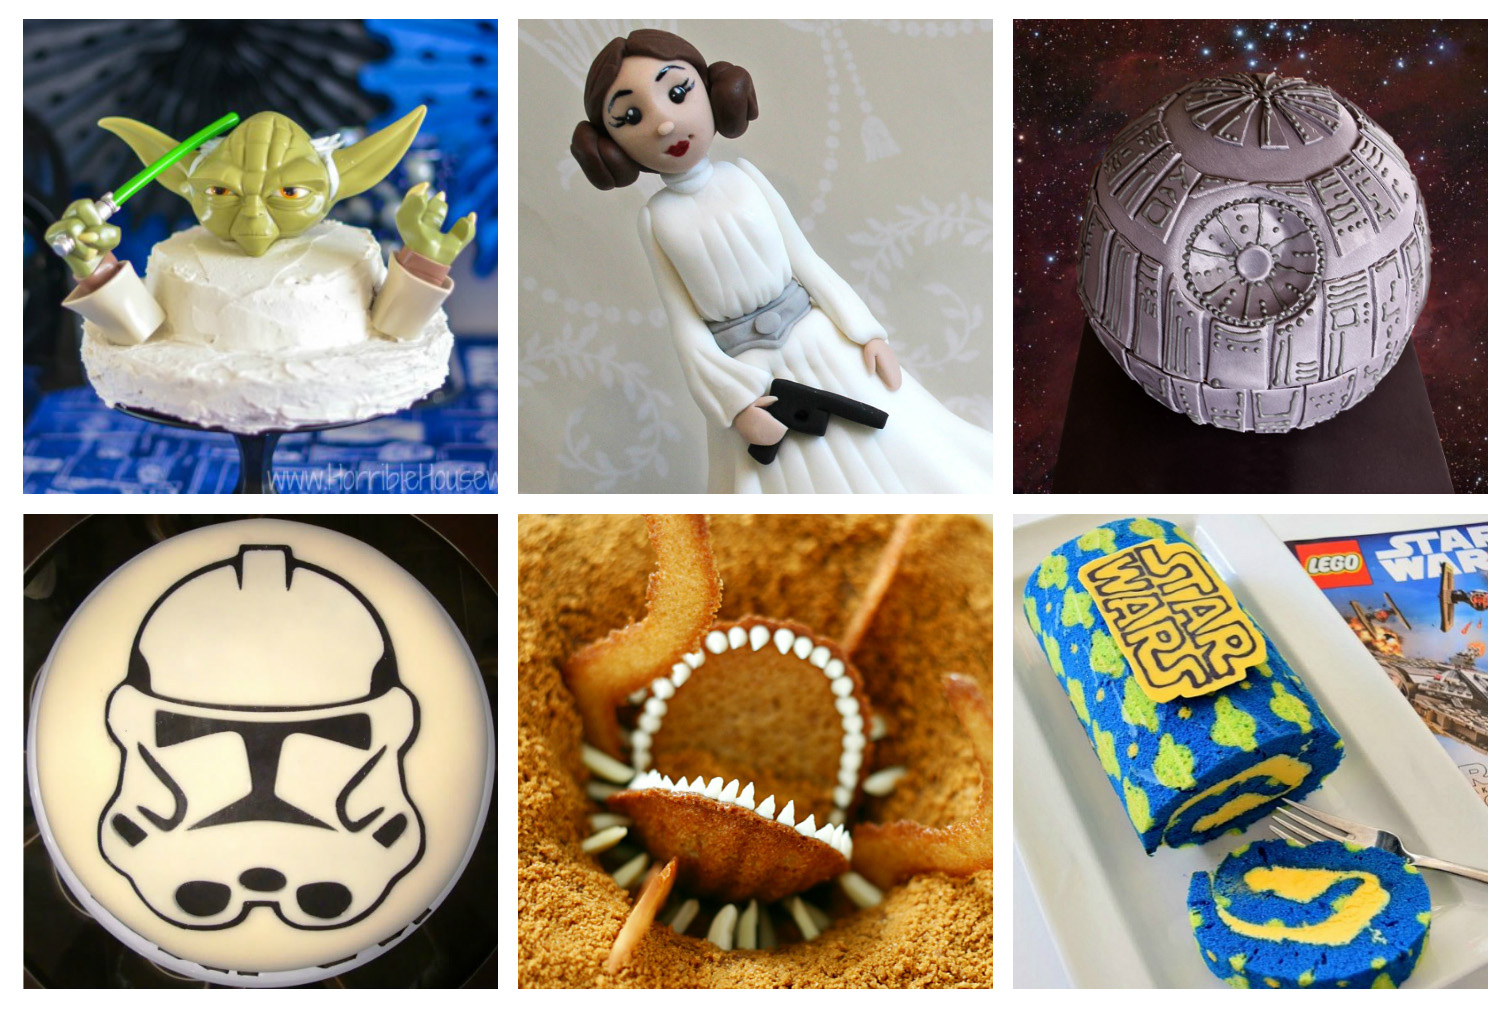 DIY Star Wars Cakes with Recipes and Instructions 3